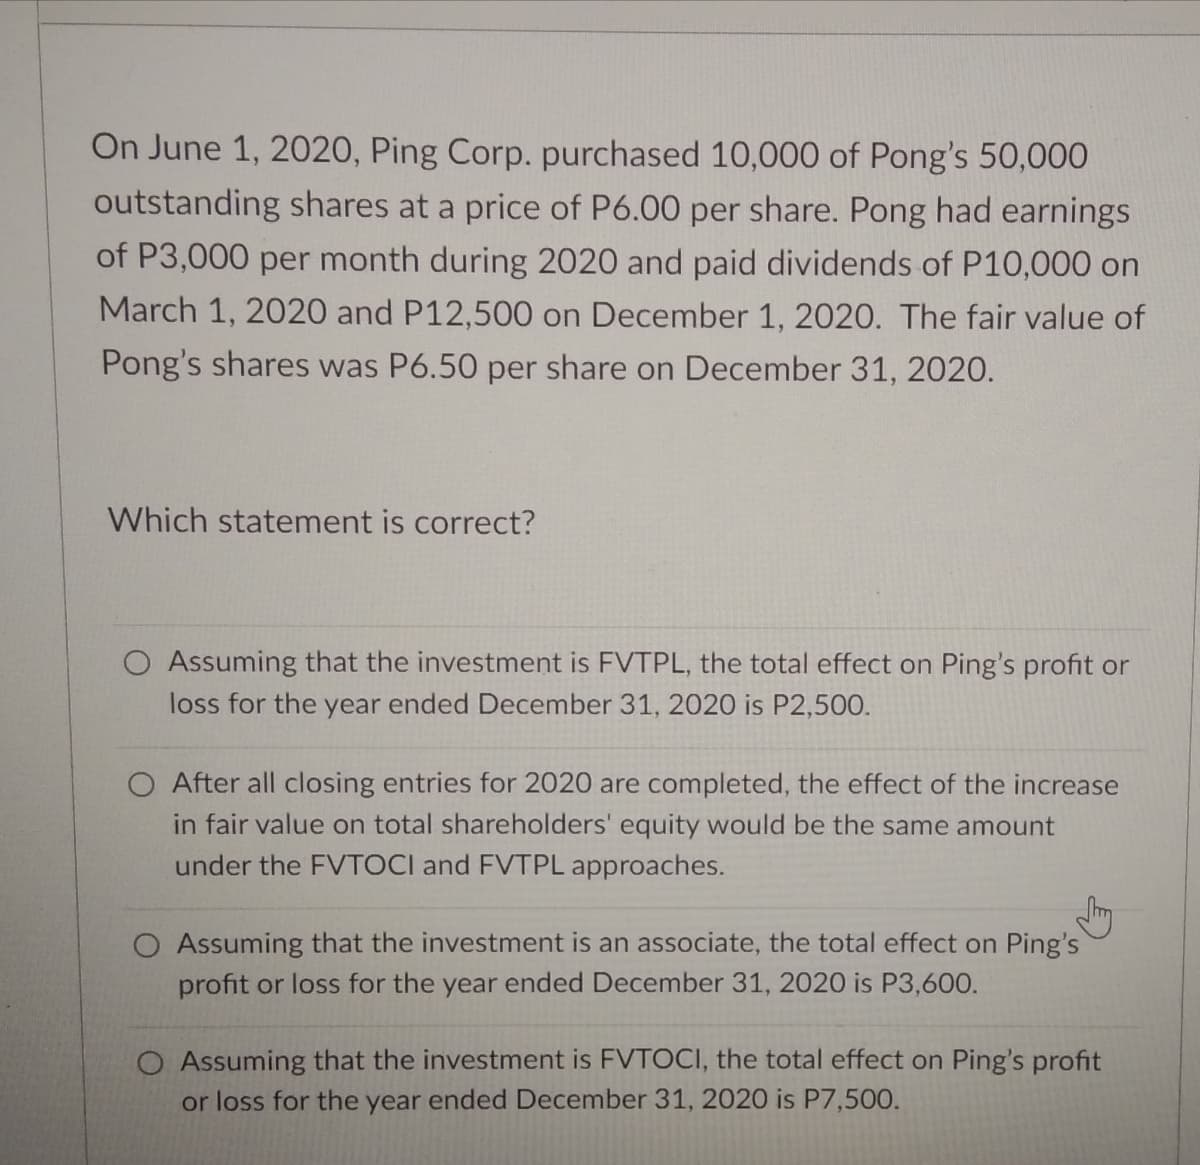 On June 1, 2020, Ping Corp. purchased 10,000 of Pong's 50,000
outstanding shares at a price of P6.00 per share. Pong had earnings
of P3,000 per month during 2020 and paid dividends of P10,000 on
March 1, 2020 and P12,500 on December 1, 2020. The fair value of
Pong's shares was P6.50 per share on December 31, 2020.
Which statement is correct?
O Assuming that the investment is FVTPL, the total effect on Ping's profit or
loss for the year ended December 31, 2020 is P2,500.
O After all closing entries for 2020 are completed, the effect of the increase
in fair value on total shareholders' equity would be the same amount
under the FVTOCI and FVTPL approaches.
O Assuming that the investment is an associate, the total effect on Ping's
profit or loss for the year ended December 31, 2020 is P3,600.
O Assuming that the investment is FVTOCI, the total effect on Ping's profit
or loss for the year ended December 31, 2020 is P7,500.
